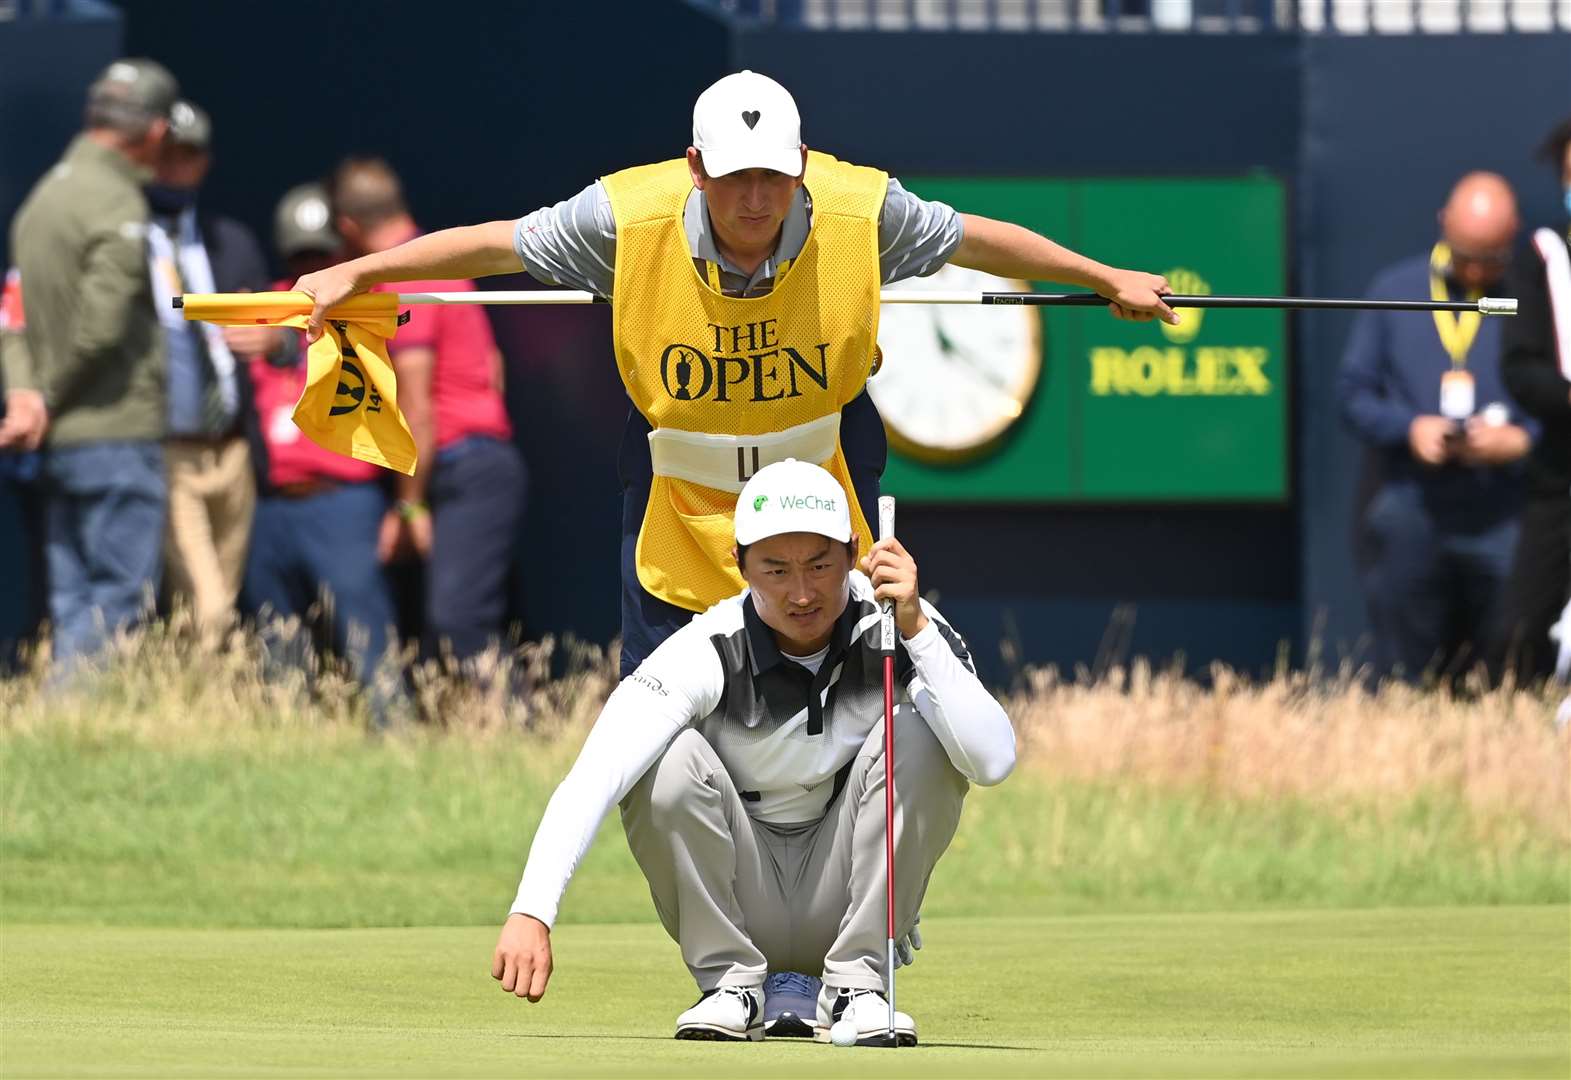 The best pictures from The Open